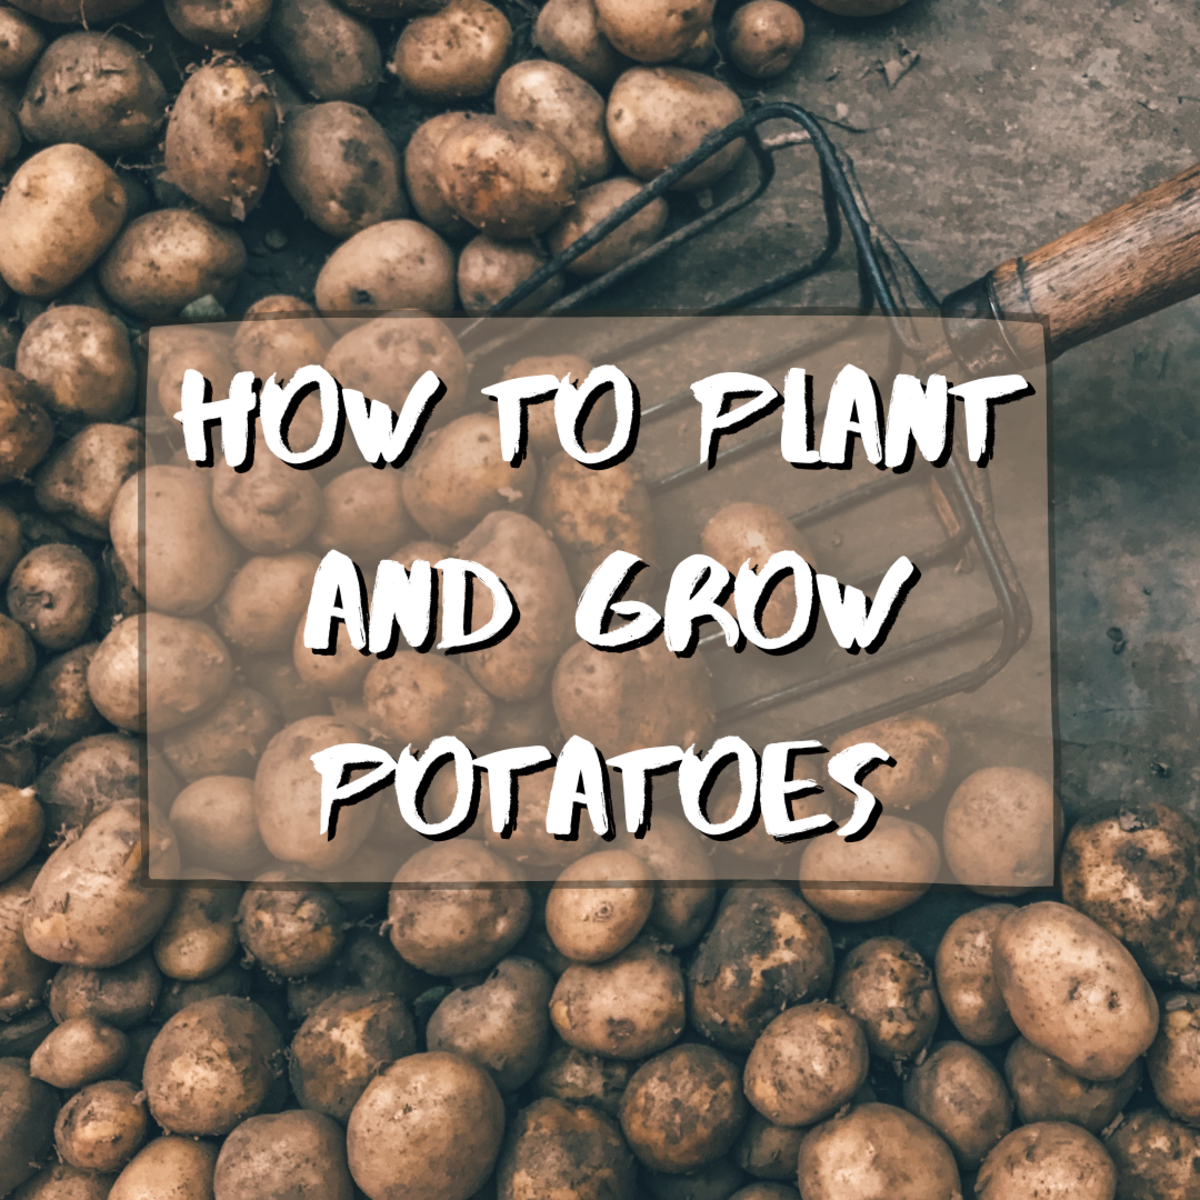 Read on for tips and info on how to grow potatoes. Learn everything you need to know from planting all the way to harvest.